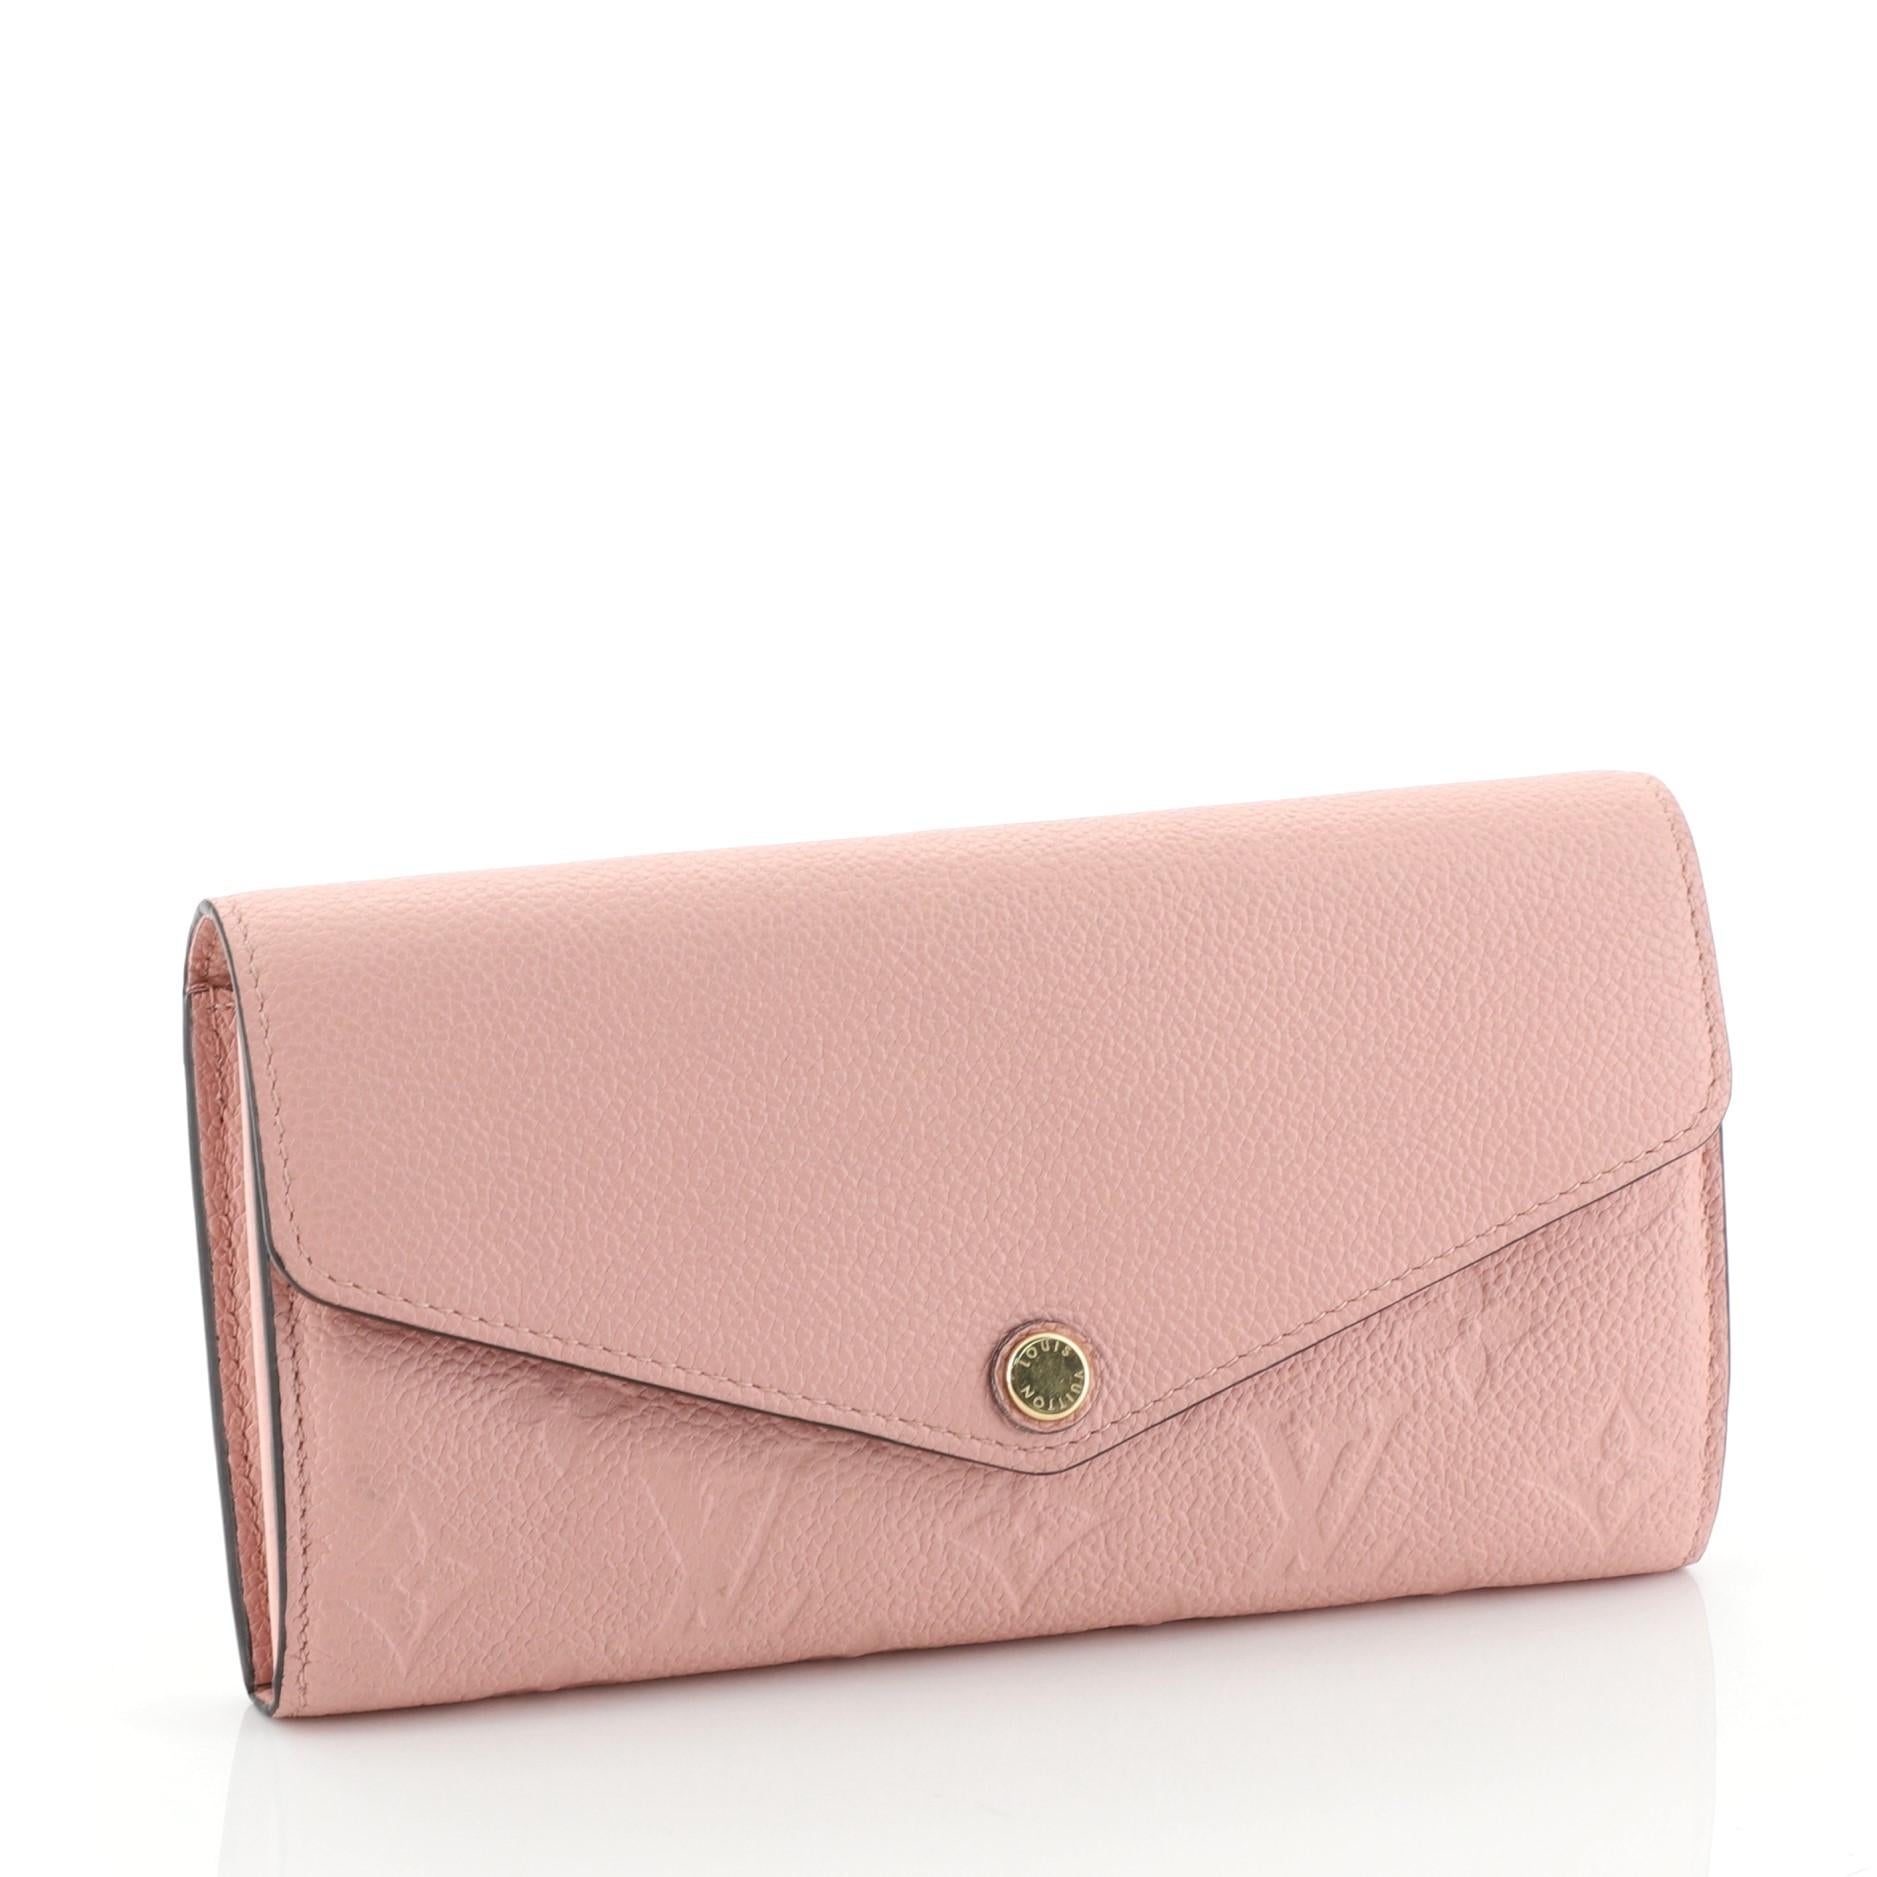 This Louis Vuitton Sarah Wallet NM Monogram Empreinte Leather, crafted from pink monogram empreinte leather, features an envelope-style frontal flap and gold-tone hardware. Its snap button closure opens to a pink leather interior with multiple card